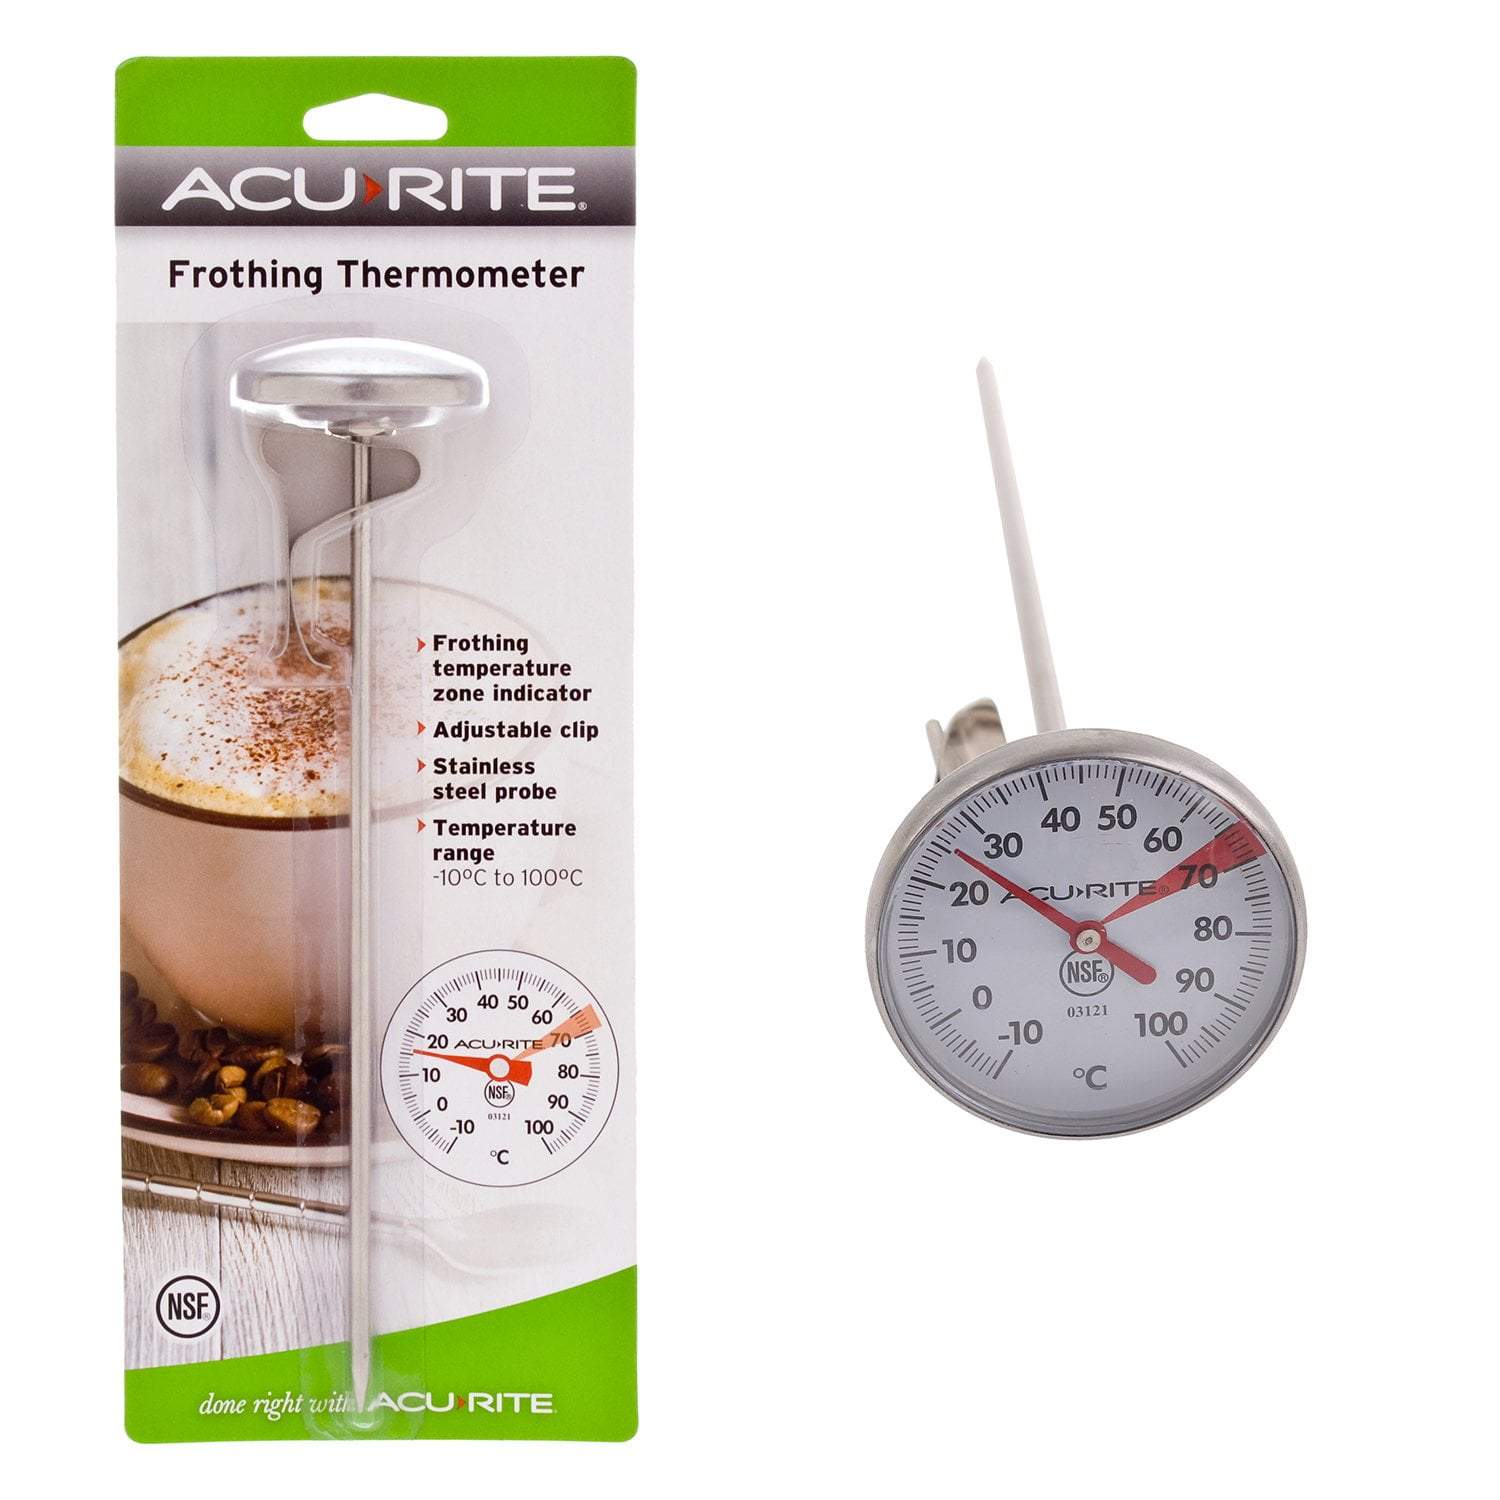 Acurite Large Frothing Thermometer - 4cm Dial